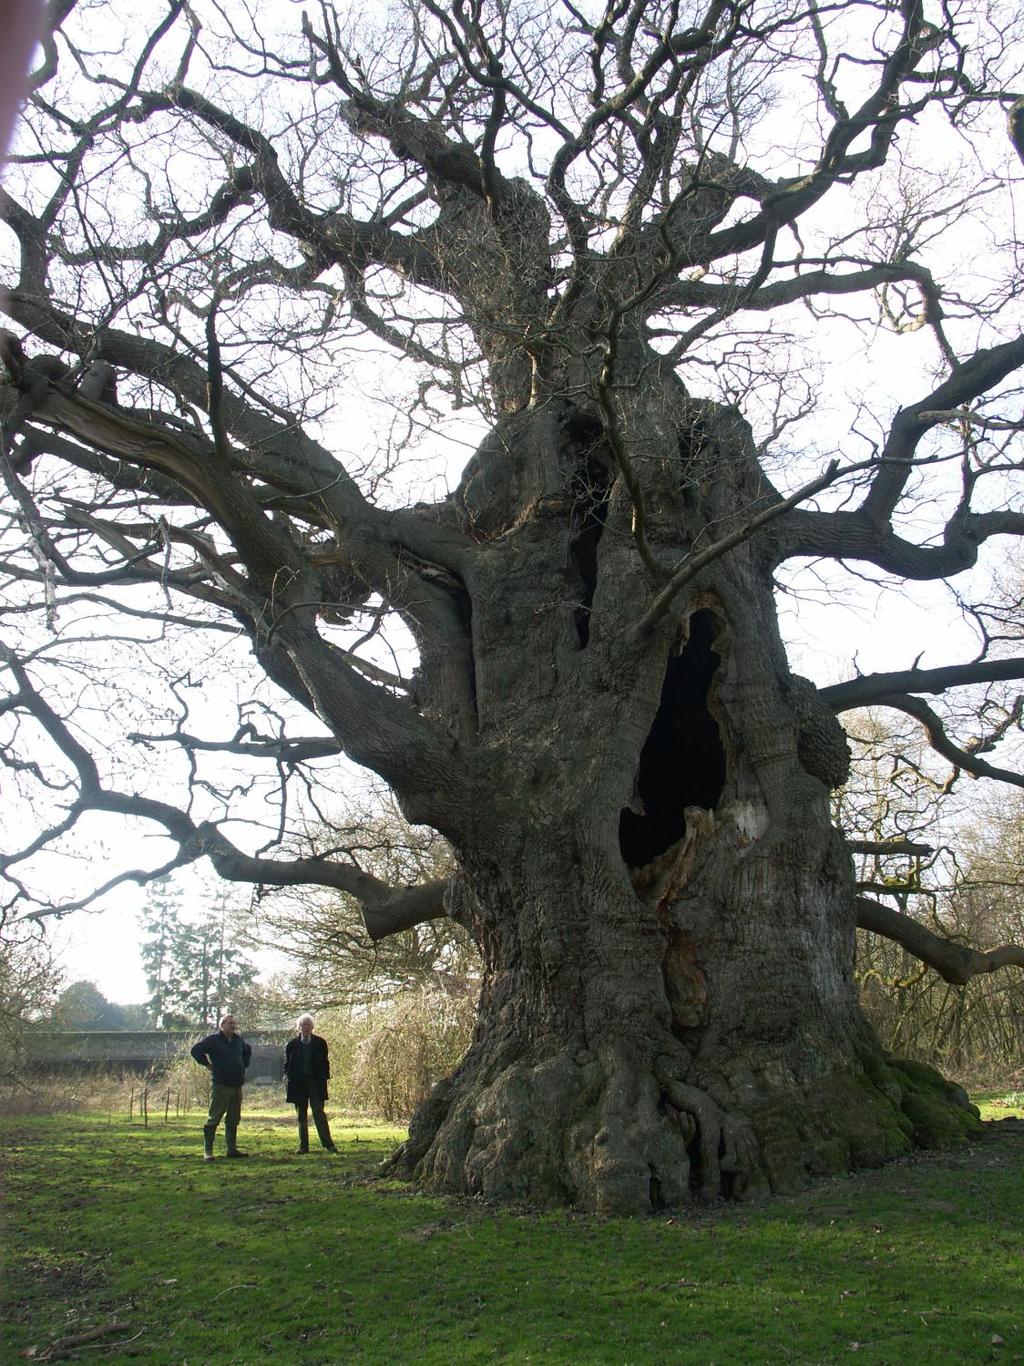 The oak called Majesty at Fredville; it